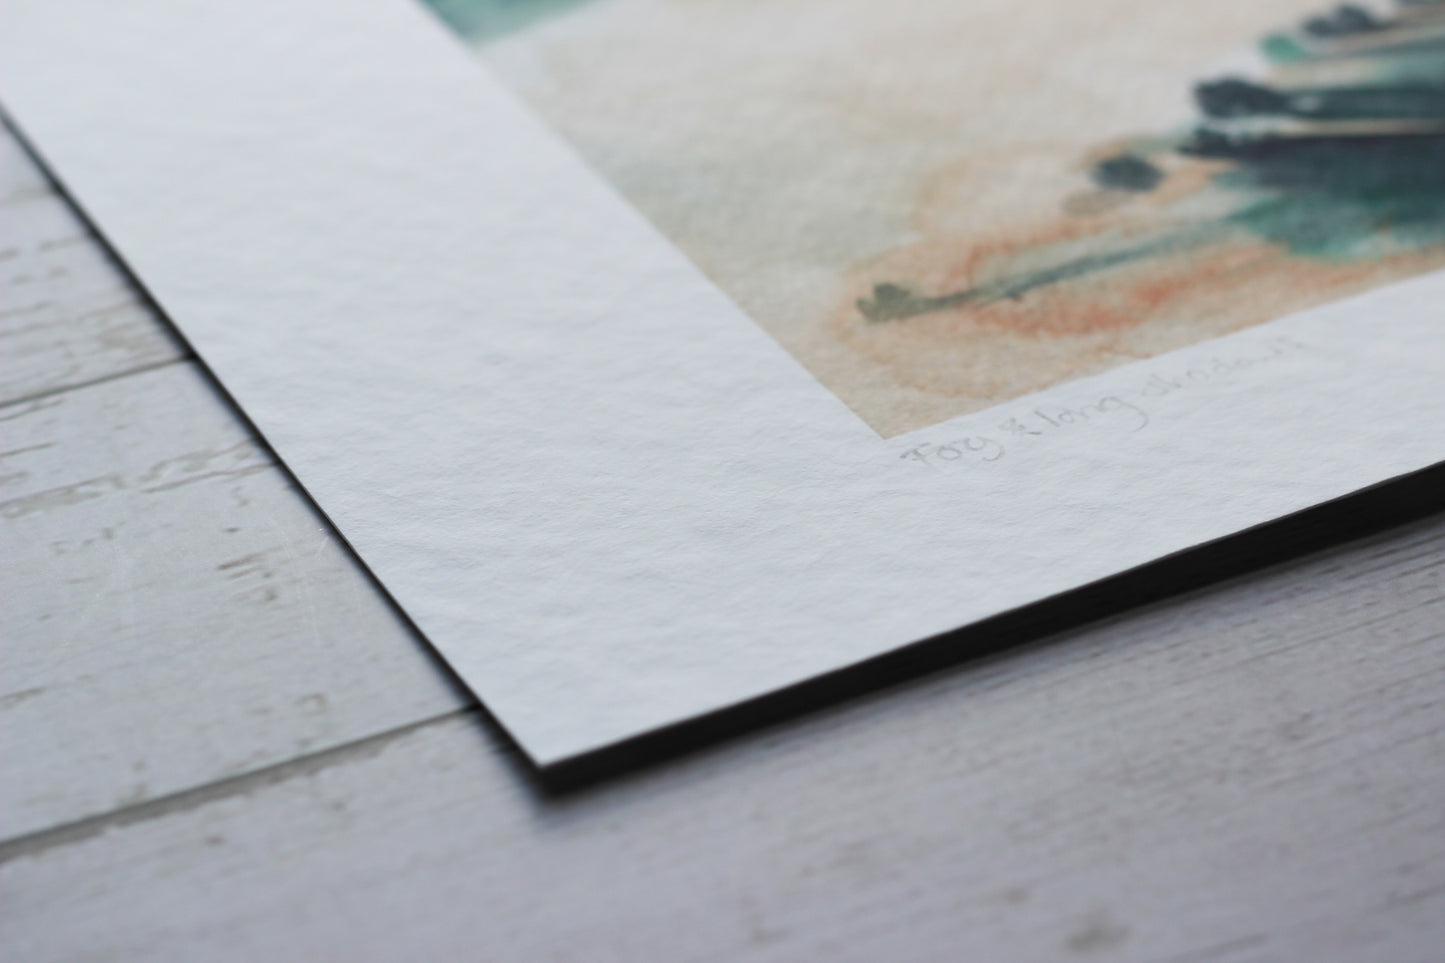 A close up of the archival Hahnemühle paper used to print